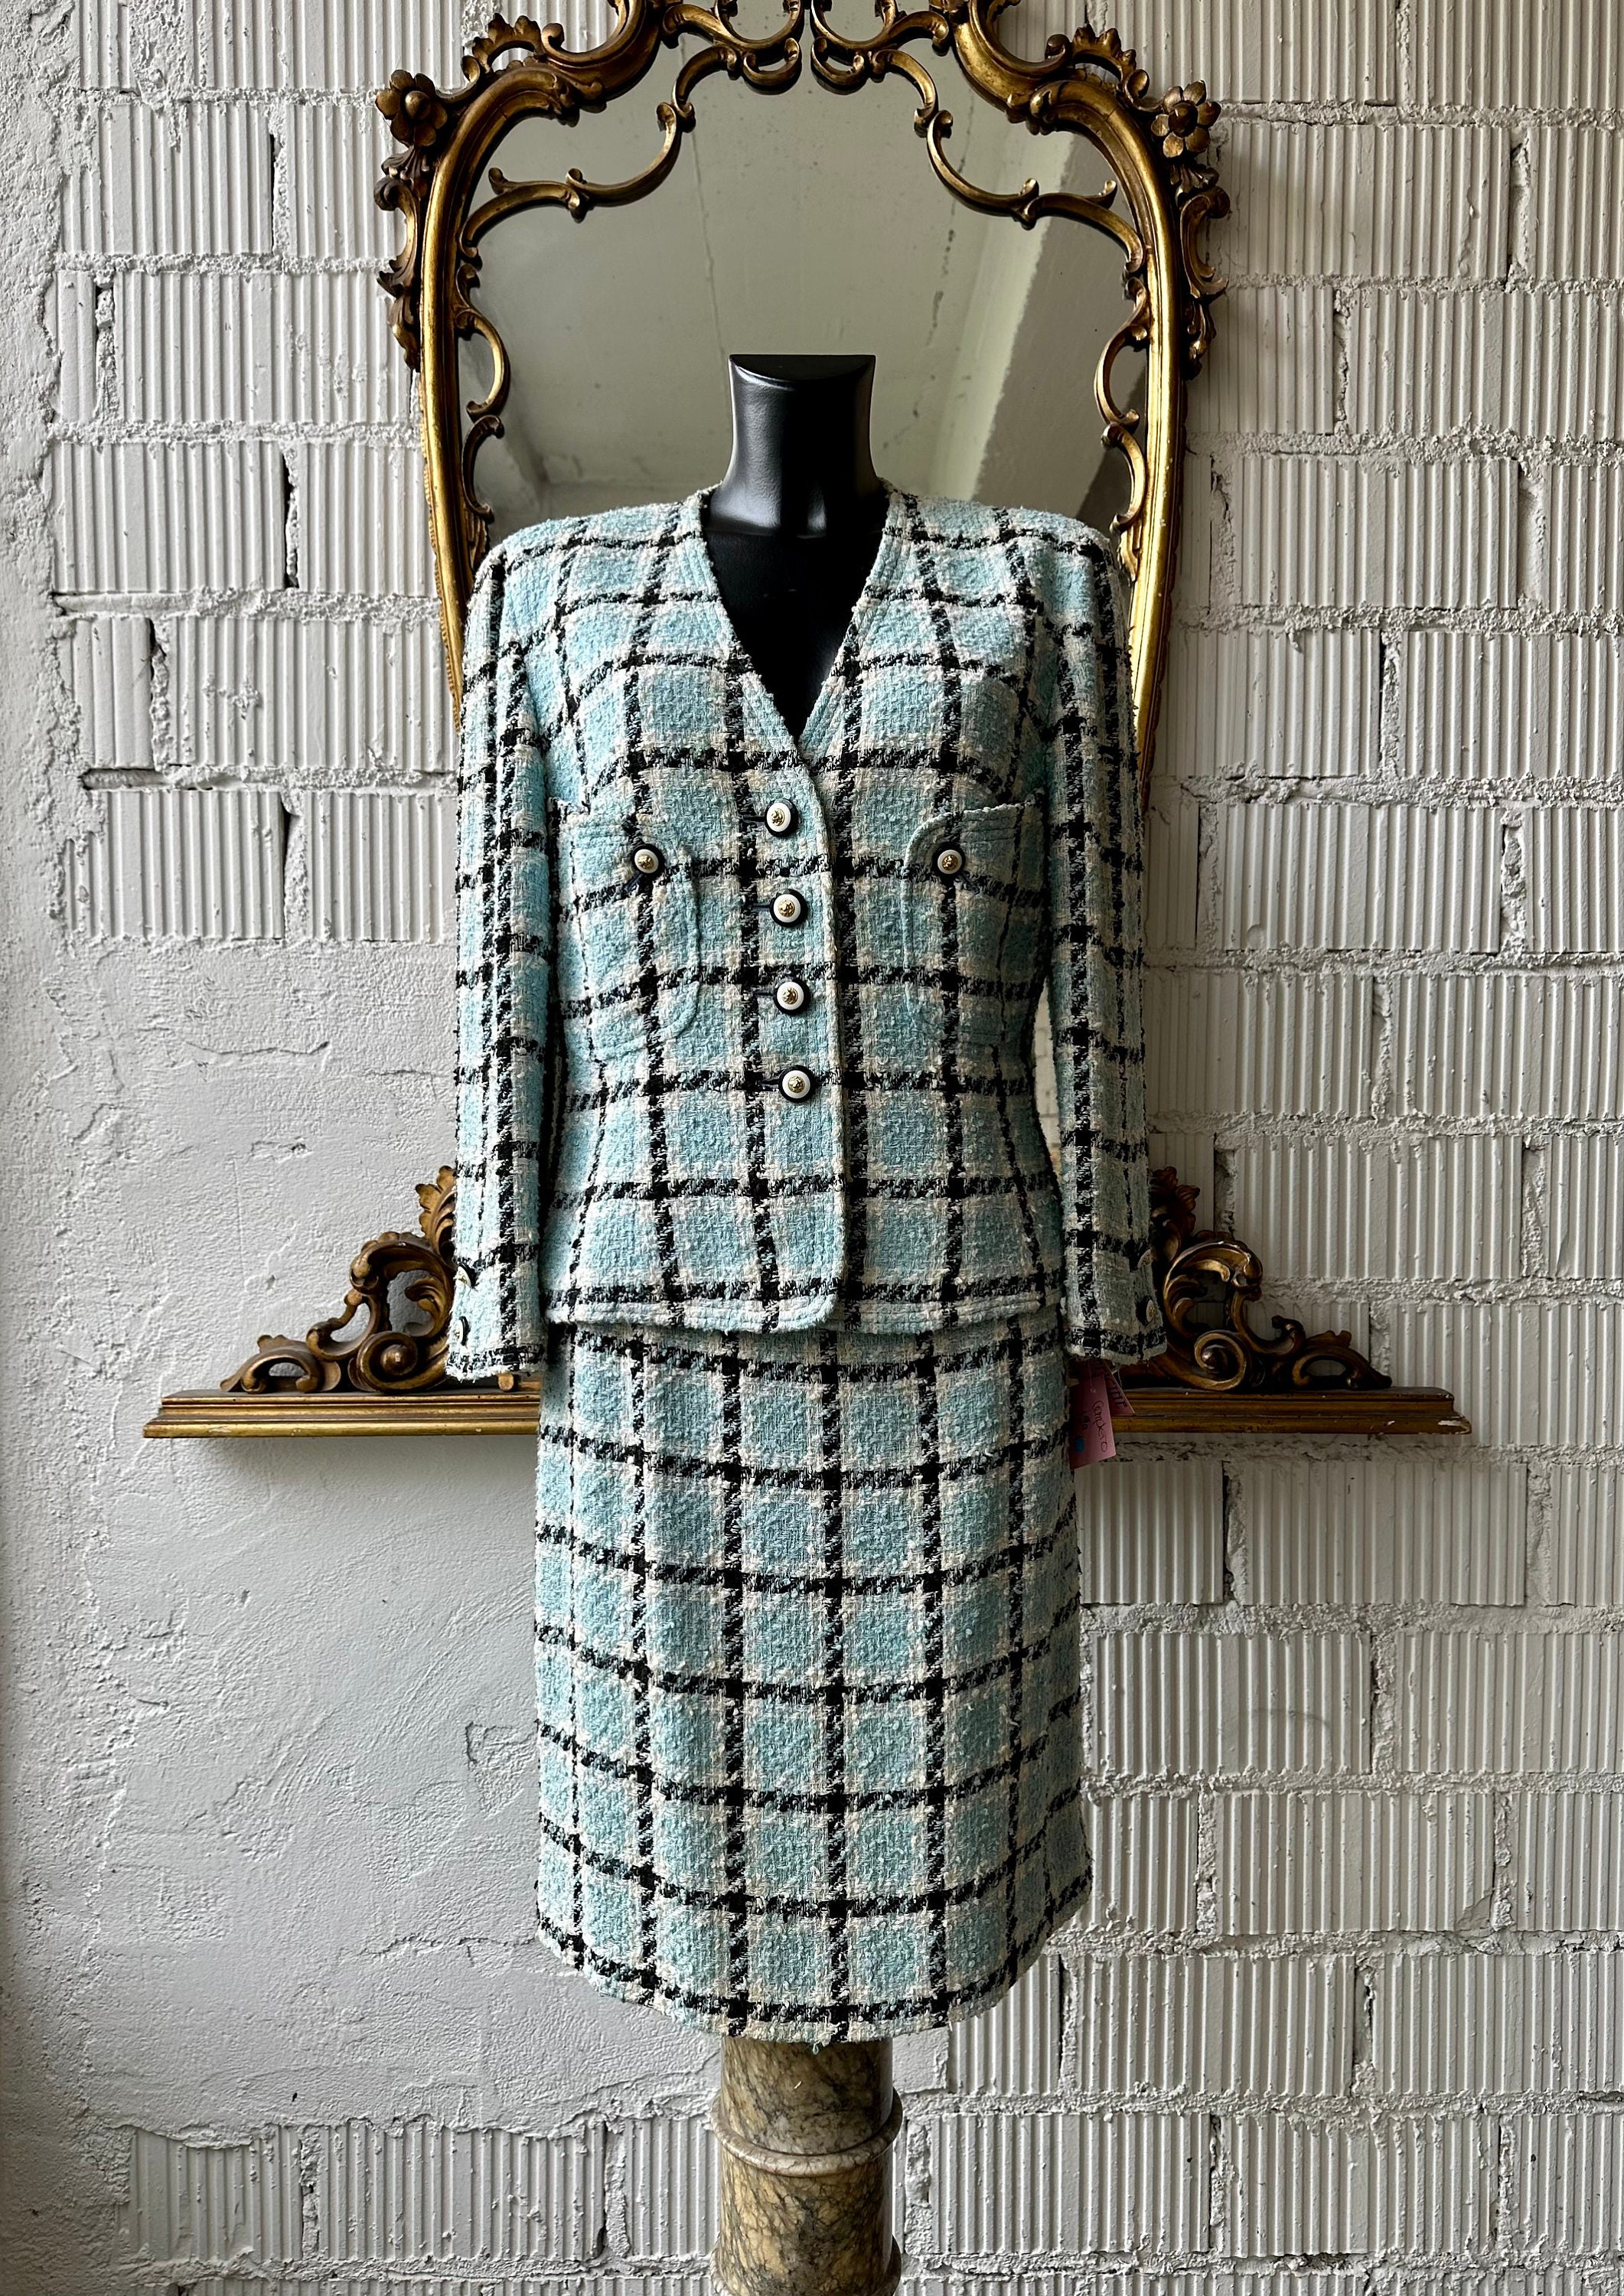 Vintage Chanel Suit Set Plaid Wool Jacket and Matching Skirt FR38